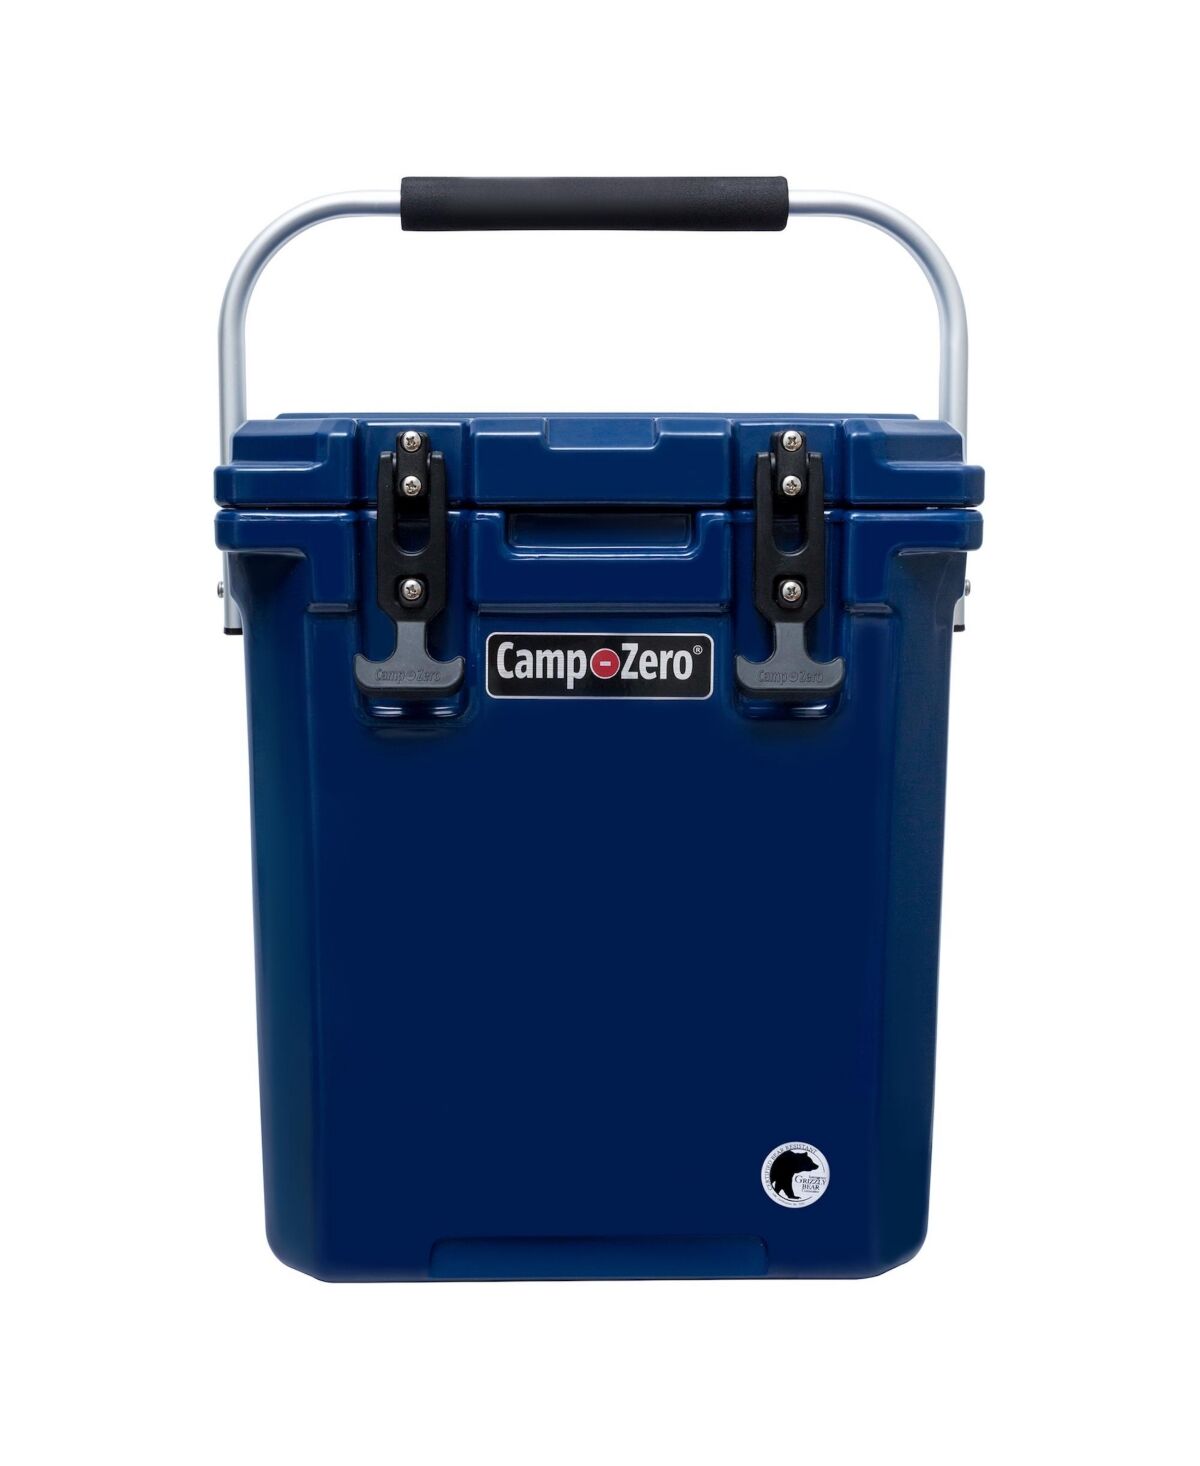 Camp-zero 16 Tall   16.9 Qt. Premium Cooler with 2 Molded-In Cup Holders and Folding Aluminum Comfort Grip Handle   Sky Blue - Navy